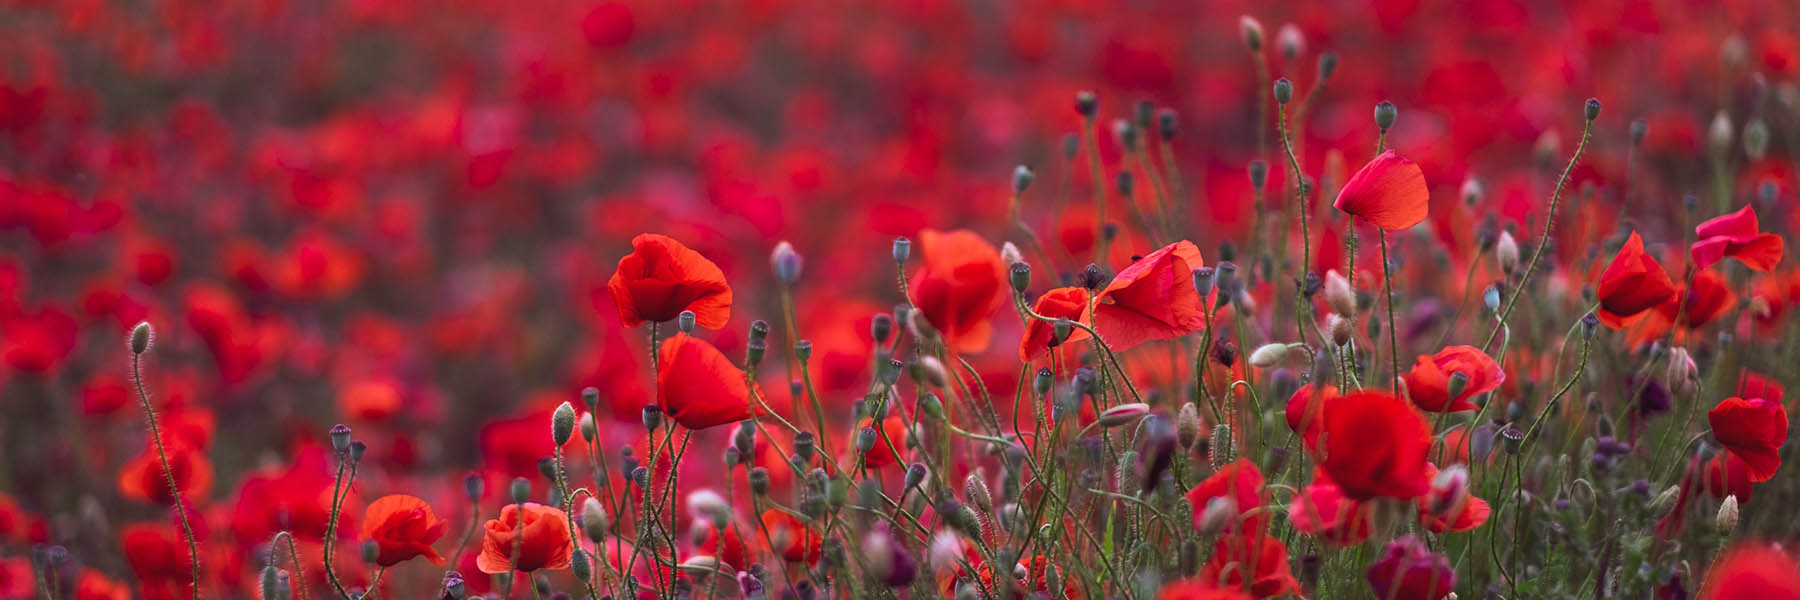 View on the field of beautiful red bloming poppies in Germany